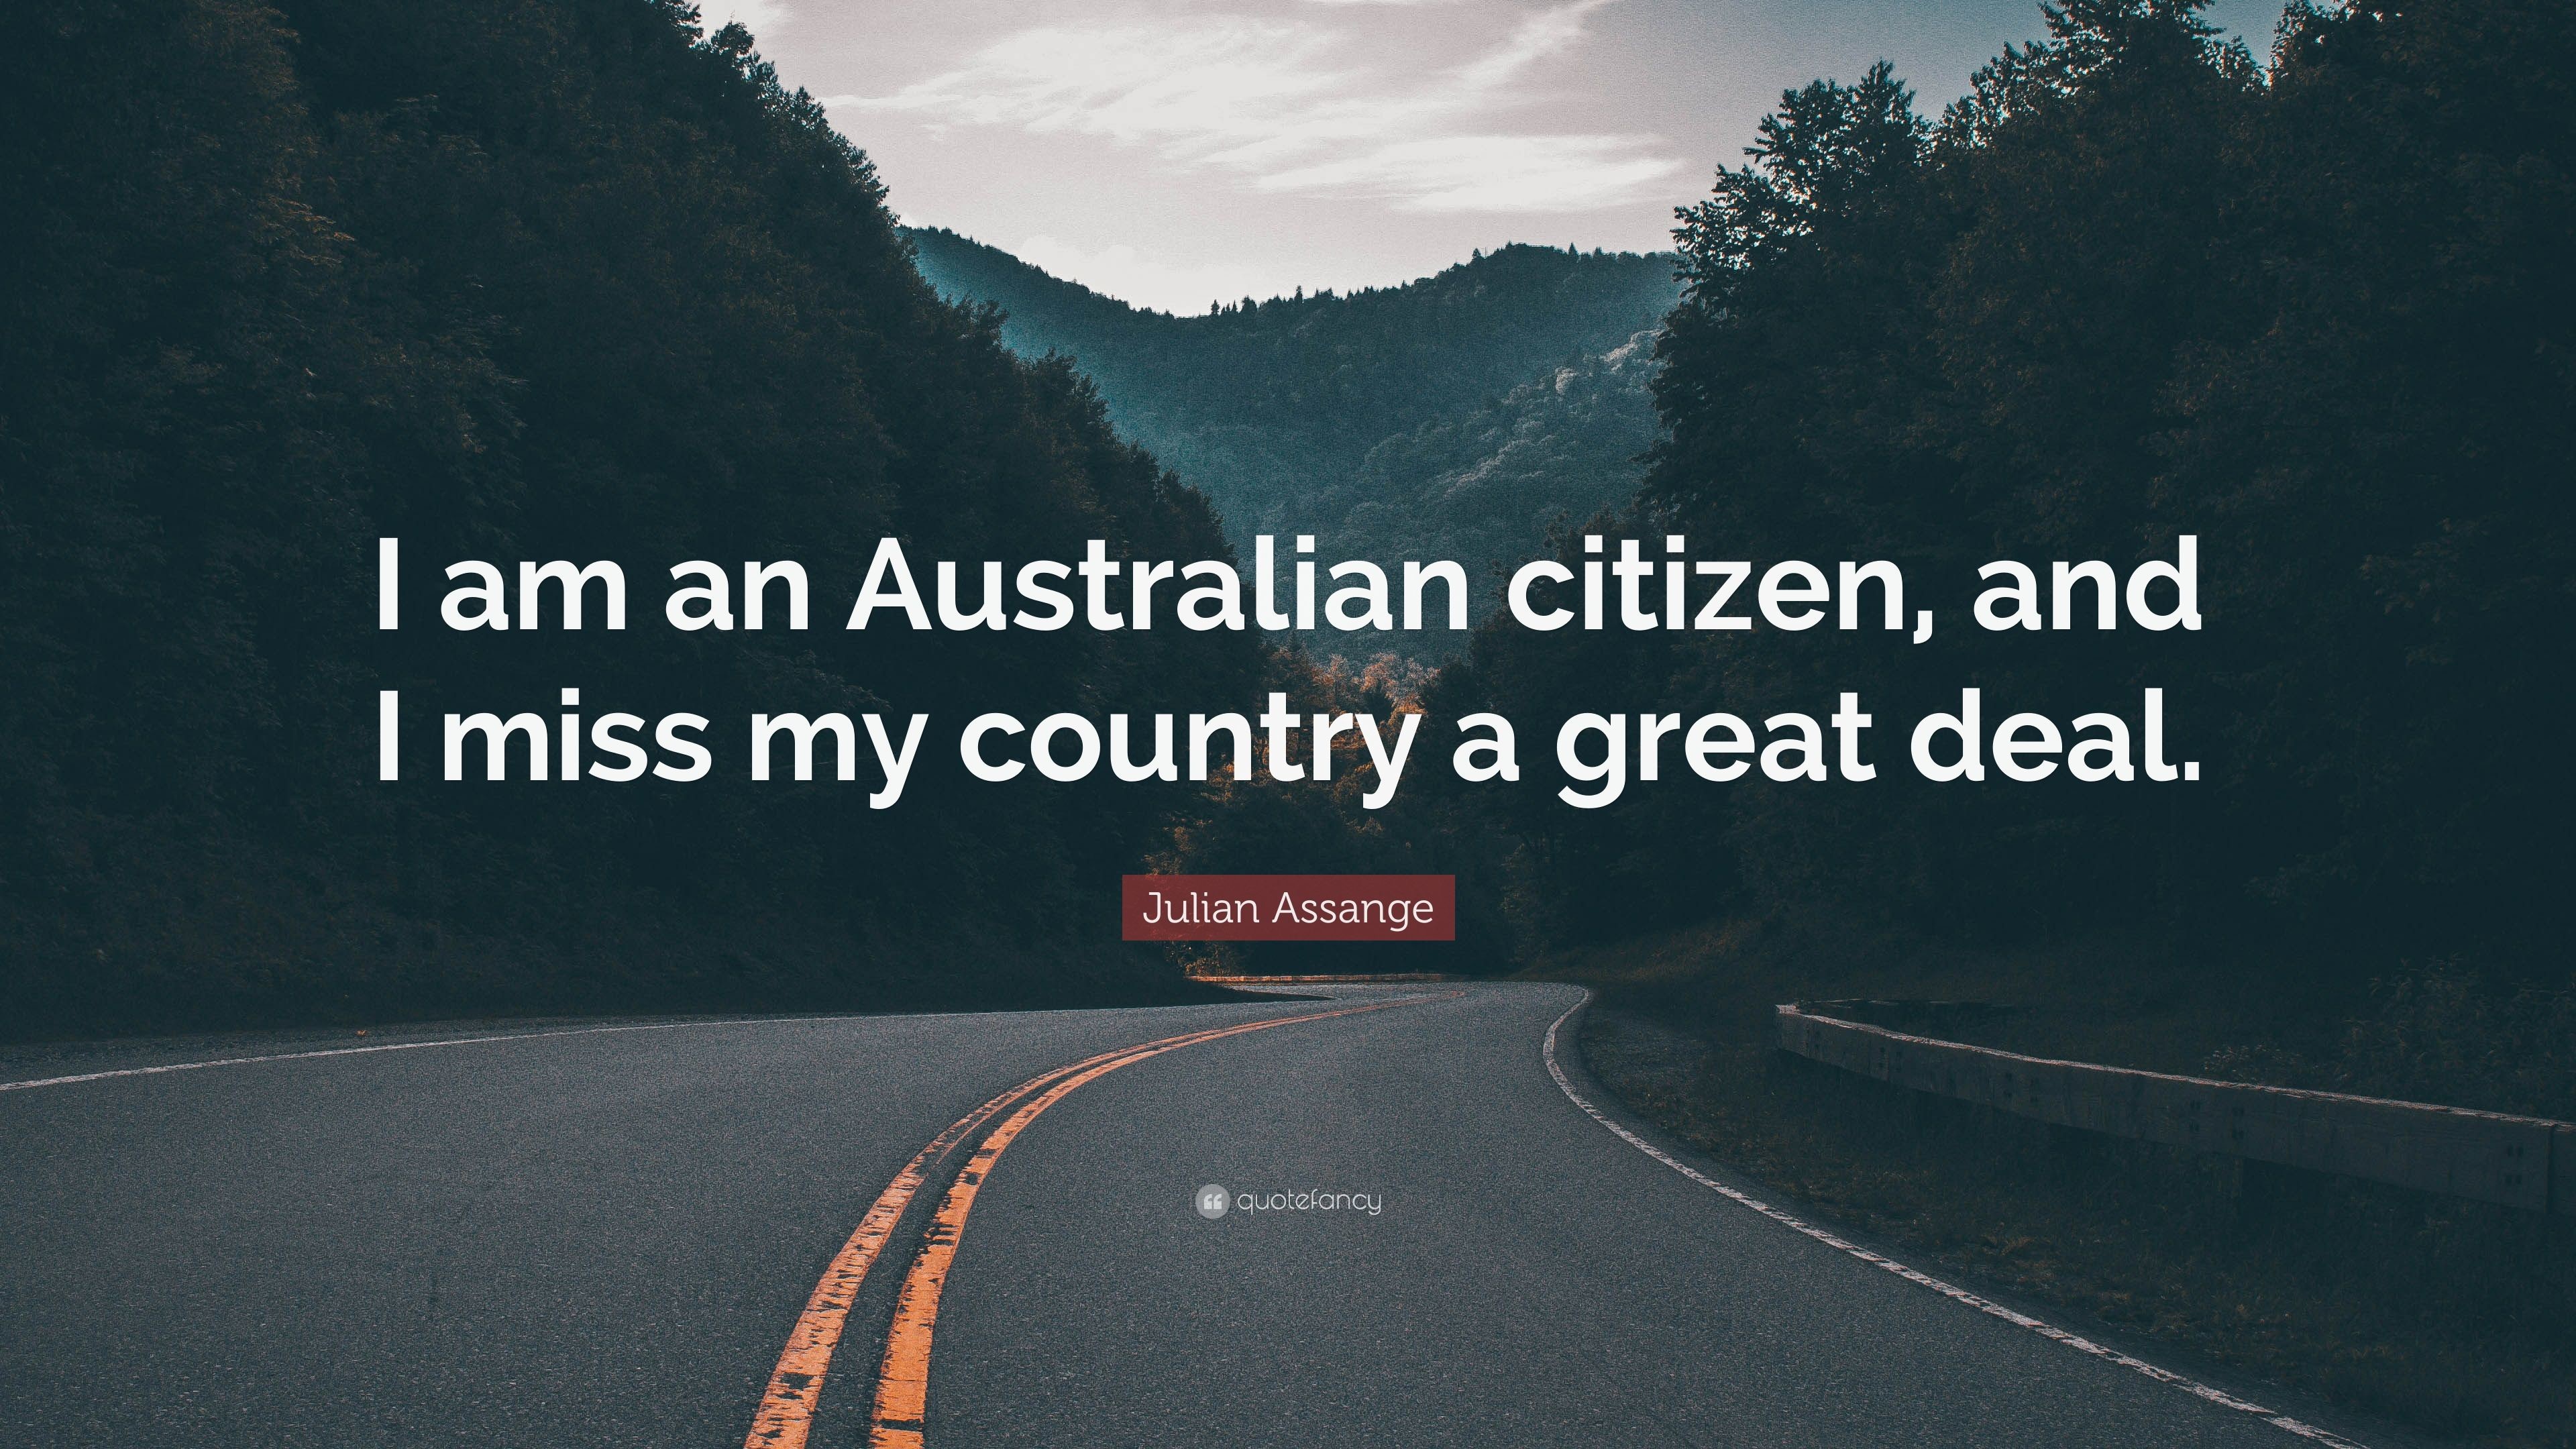 3840x2160 Julian Assange Quote: “I am an Australian citizen, and I miss my country